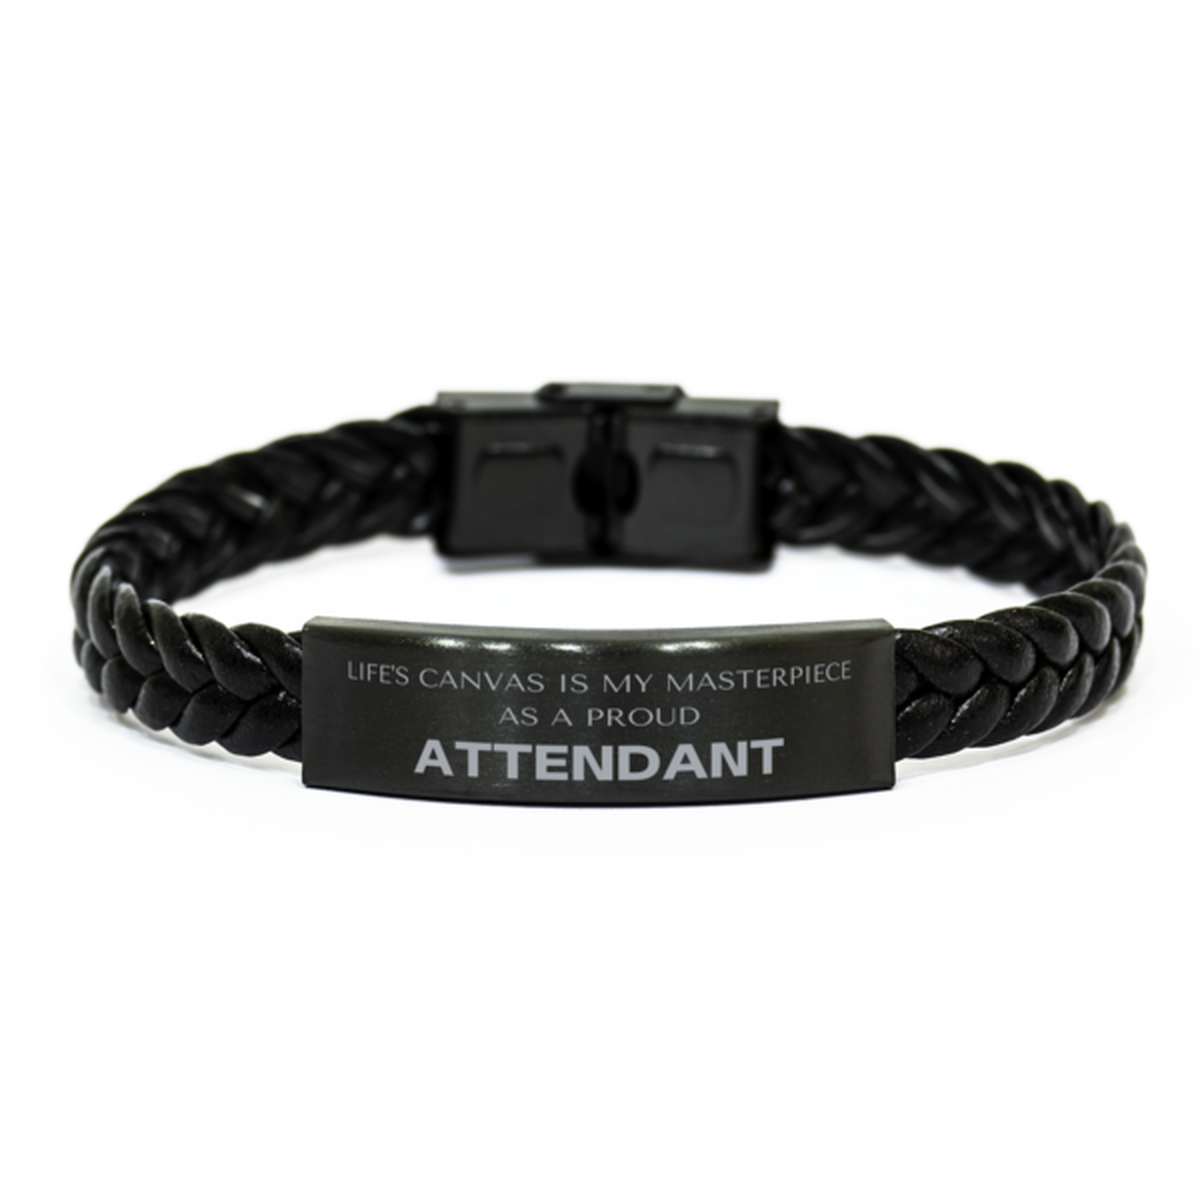 Proud Attendant Gifts, Life's canvas is my masterpiece, Epic Birthday Christmas Unique Braided Leather Bracelet For Attendant, Coworkers, Men, Women, Friends